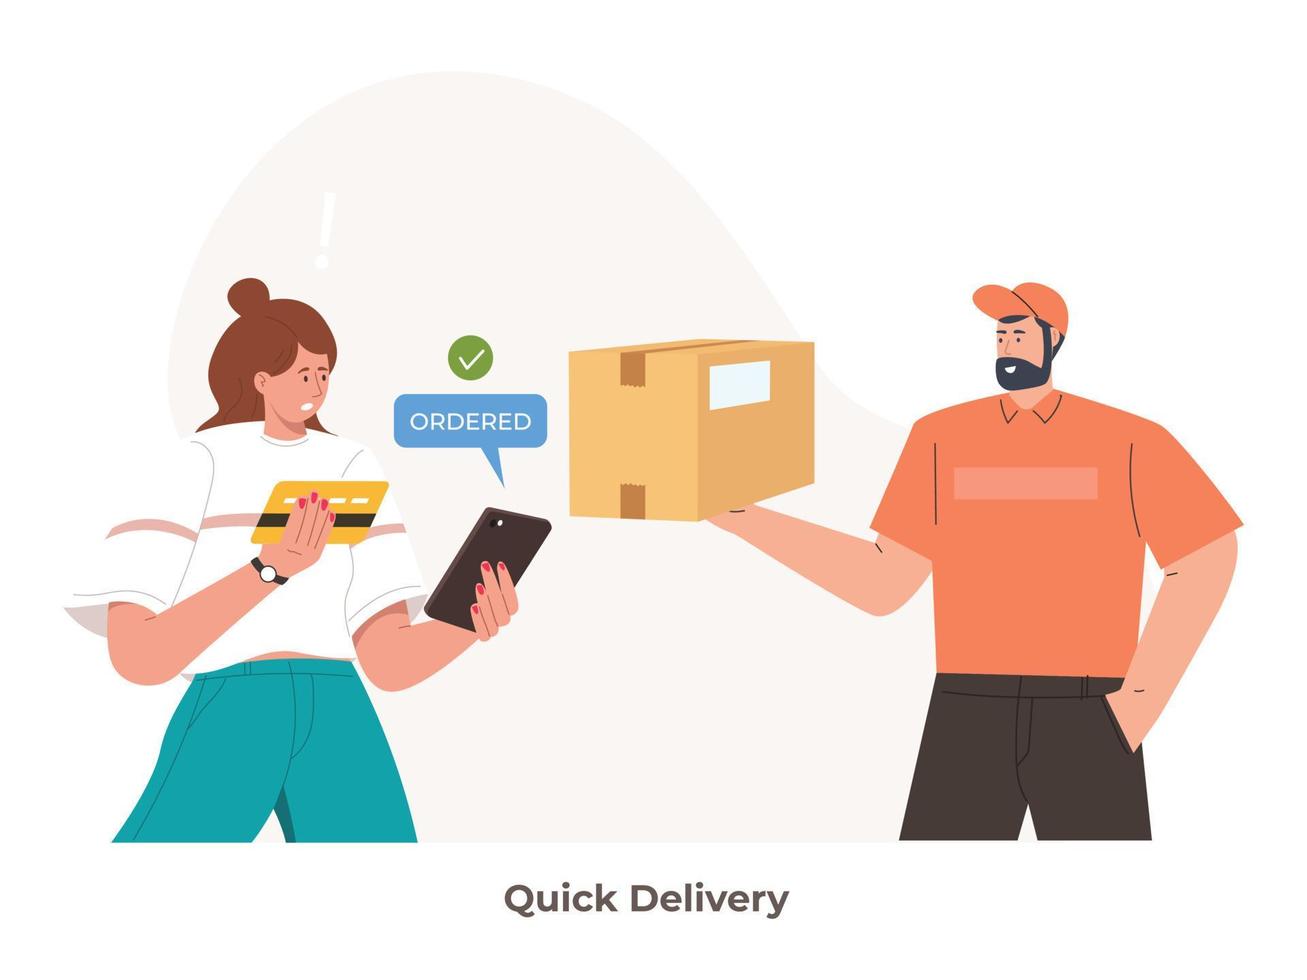 A person quickly delivers a parcel or pizza. Express food delivery and online shopping. quick delivery concept vector